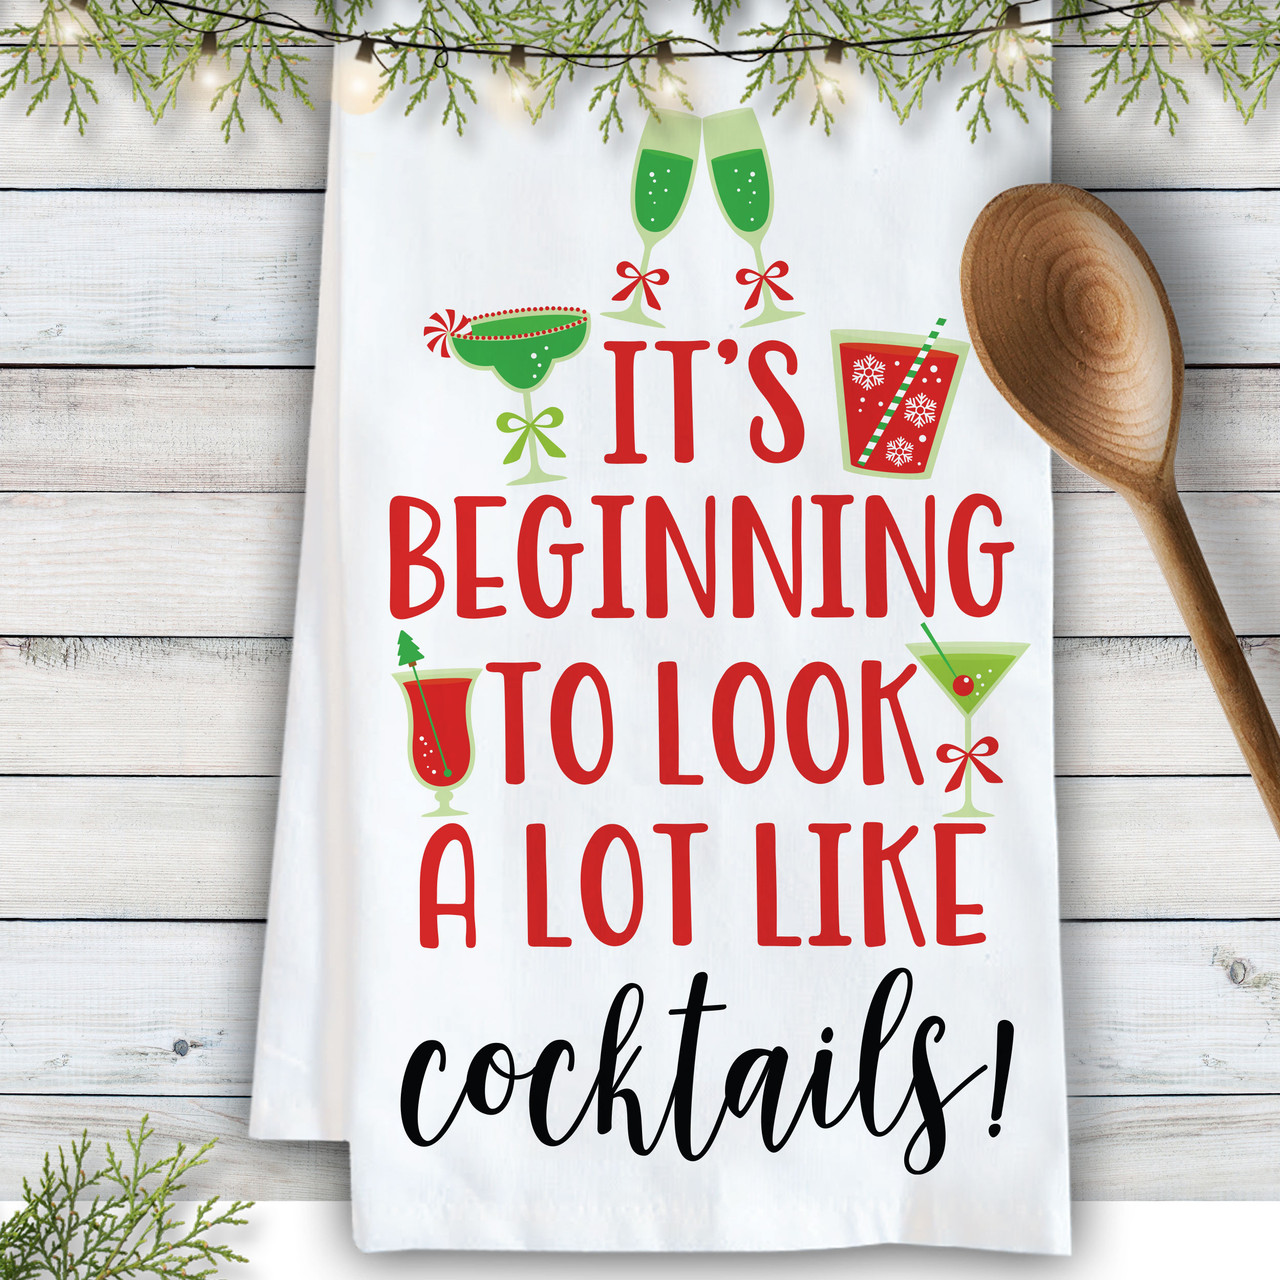 https://cdn11.bigcommerce.com/s-5grzuu6/images/stencil/1280x1280/products/6431/51646/Cocktails-Funny_Christmas_Dish_Towel__83185.1669402612.jpg?c=2